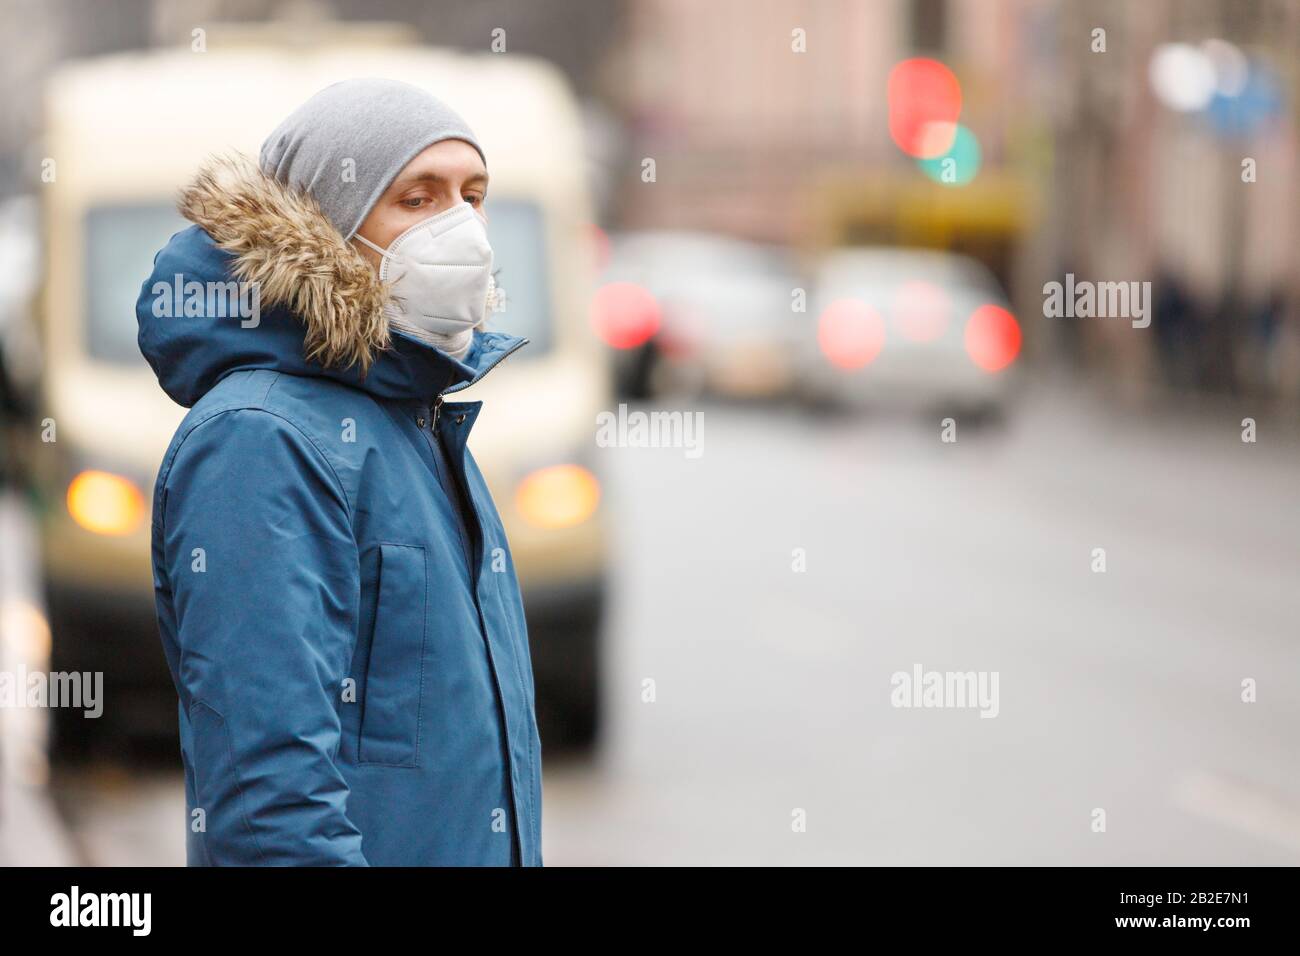 Sick man on public transport stop, wearing protective facial mask against transmissible infectious diseases and as protection against the flu or coron Stock Photo